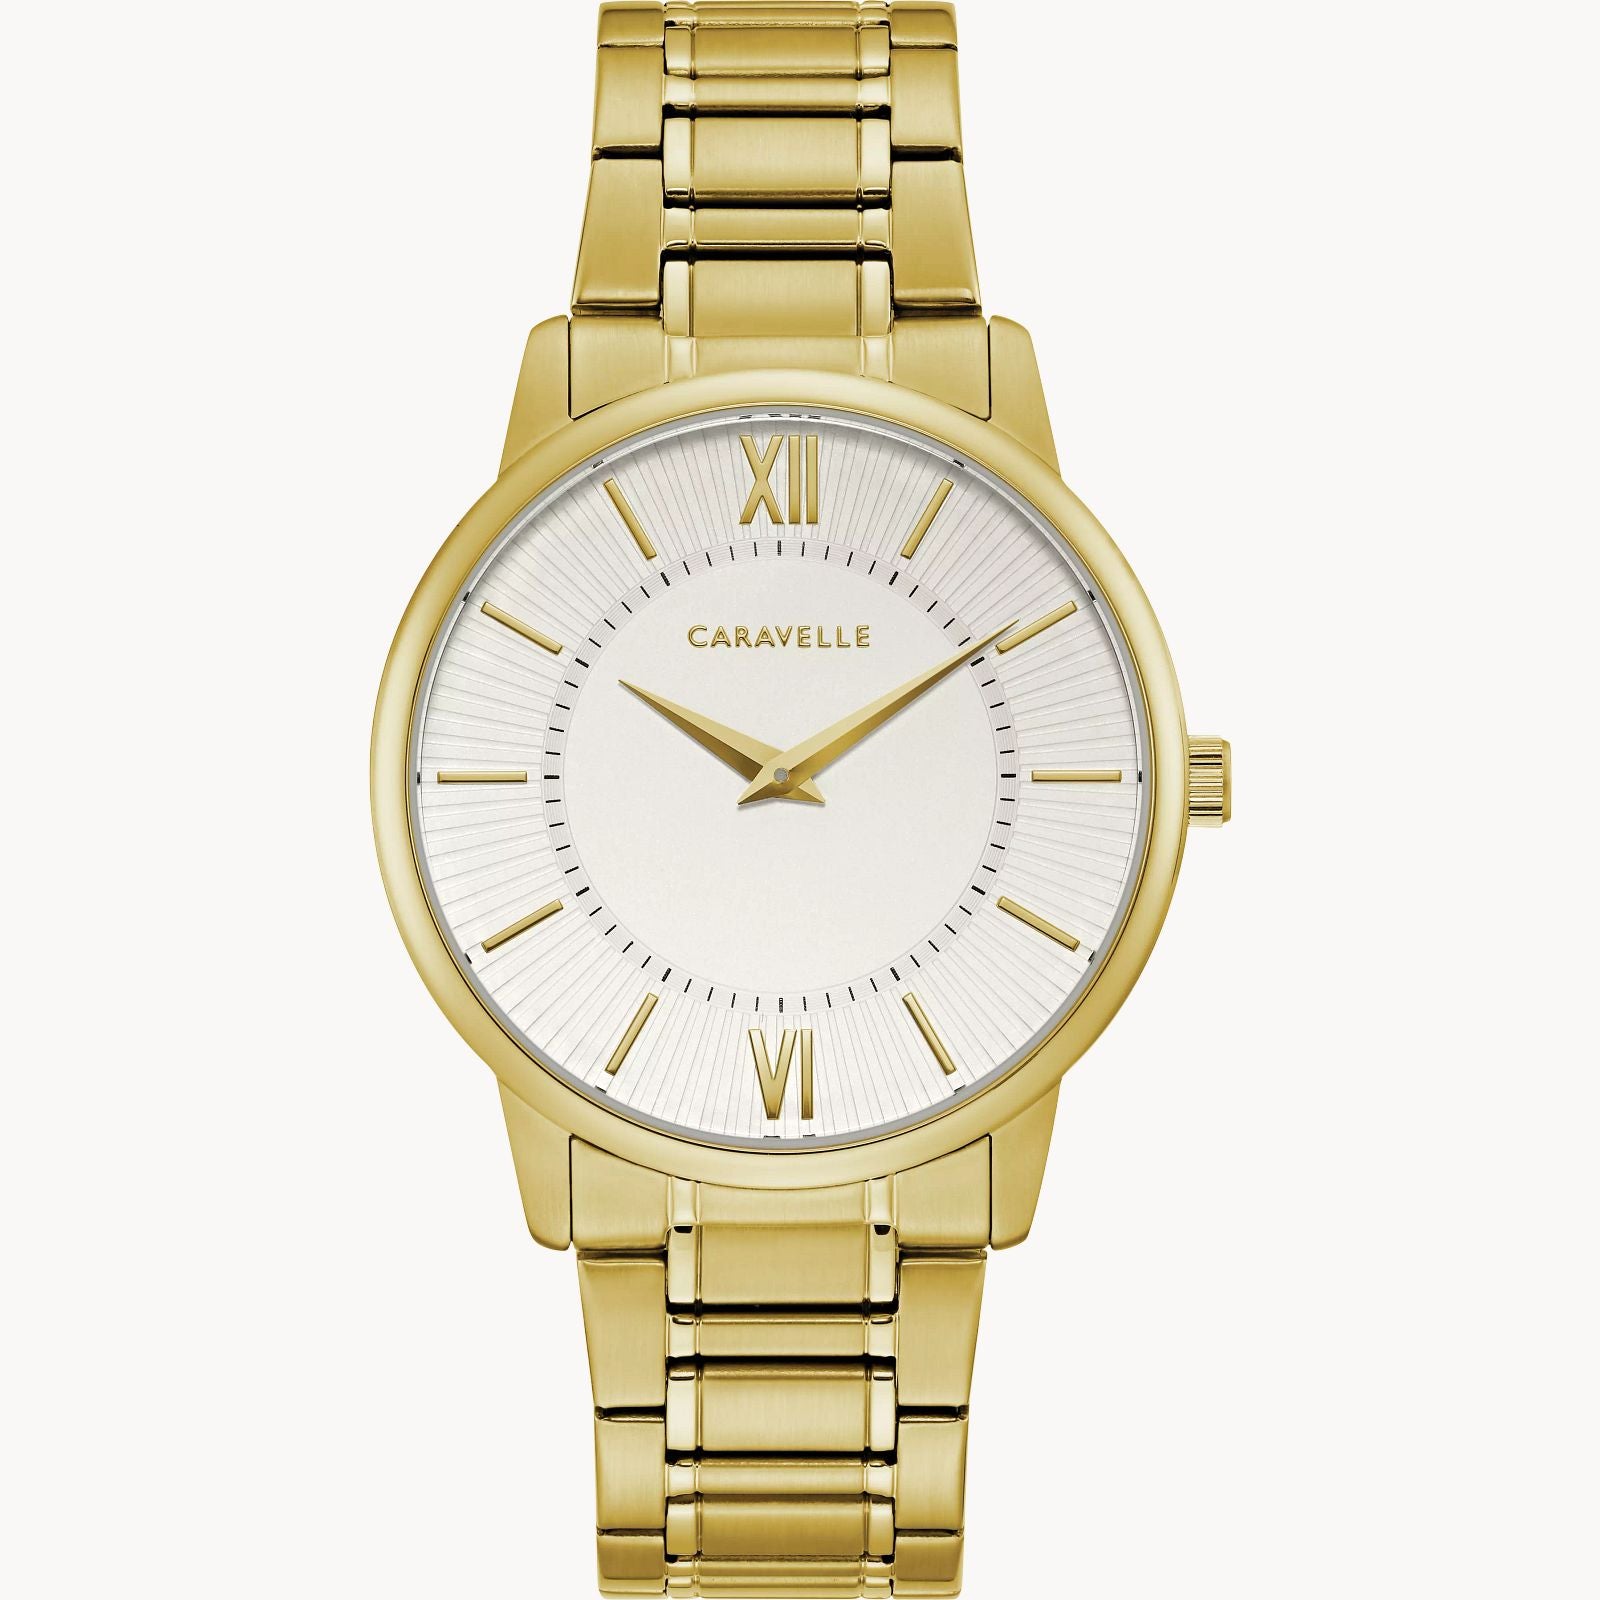 Caravelle Dress Gold Tone White Dial Mens Watch